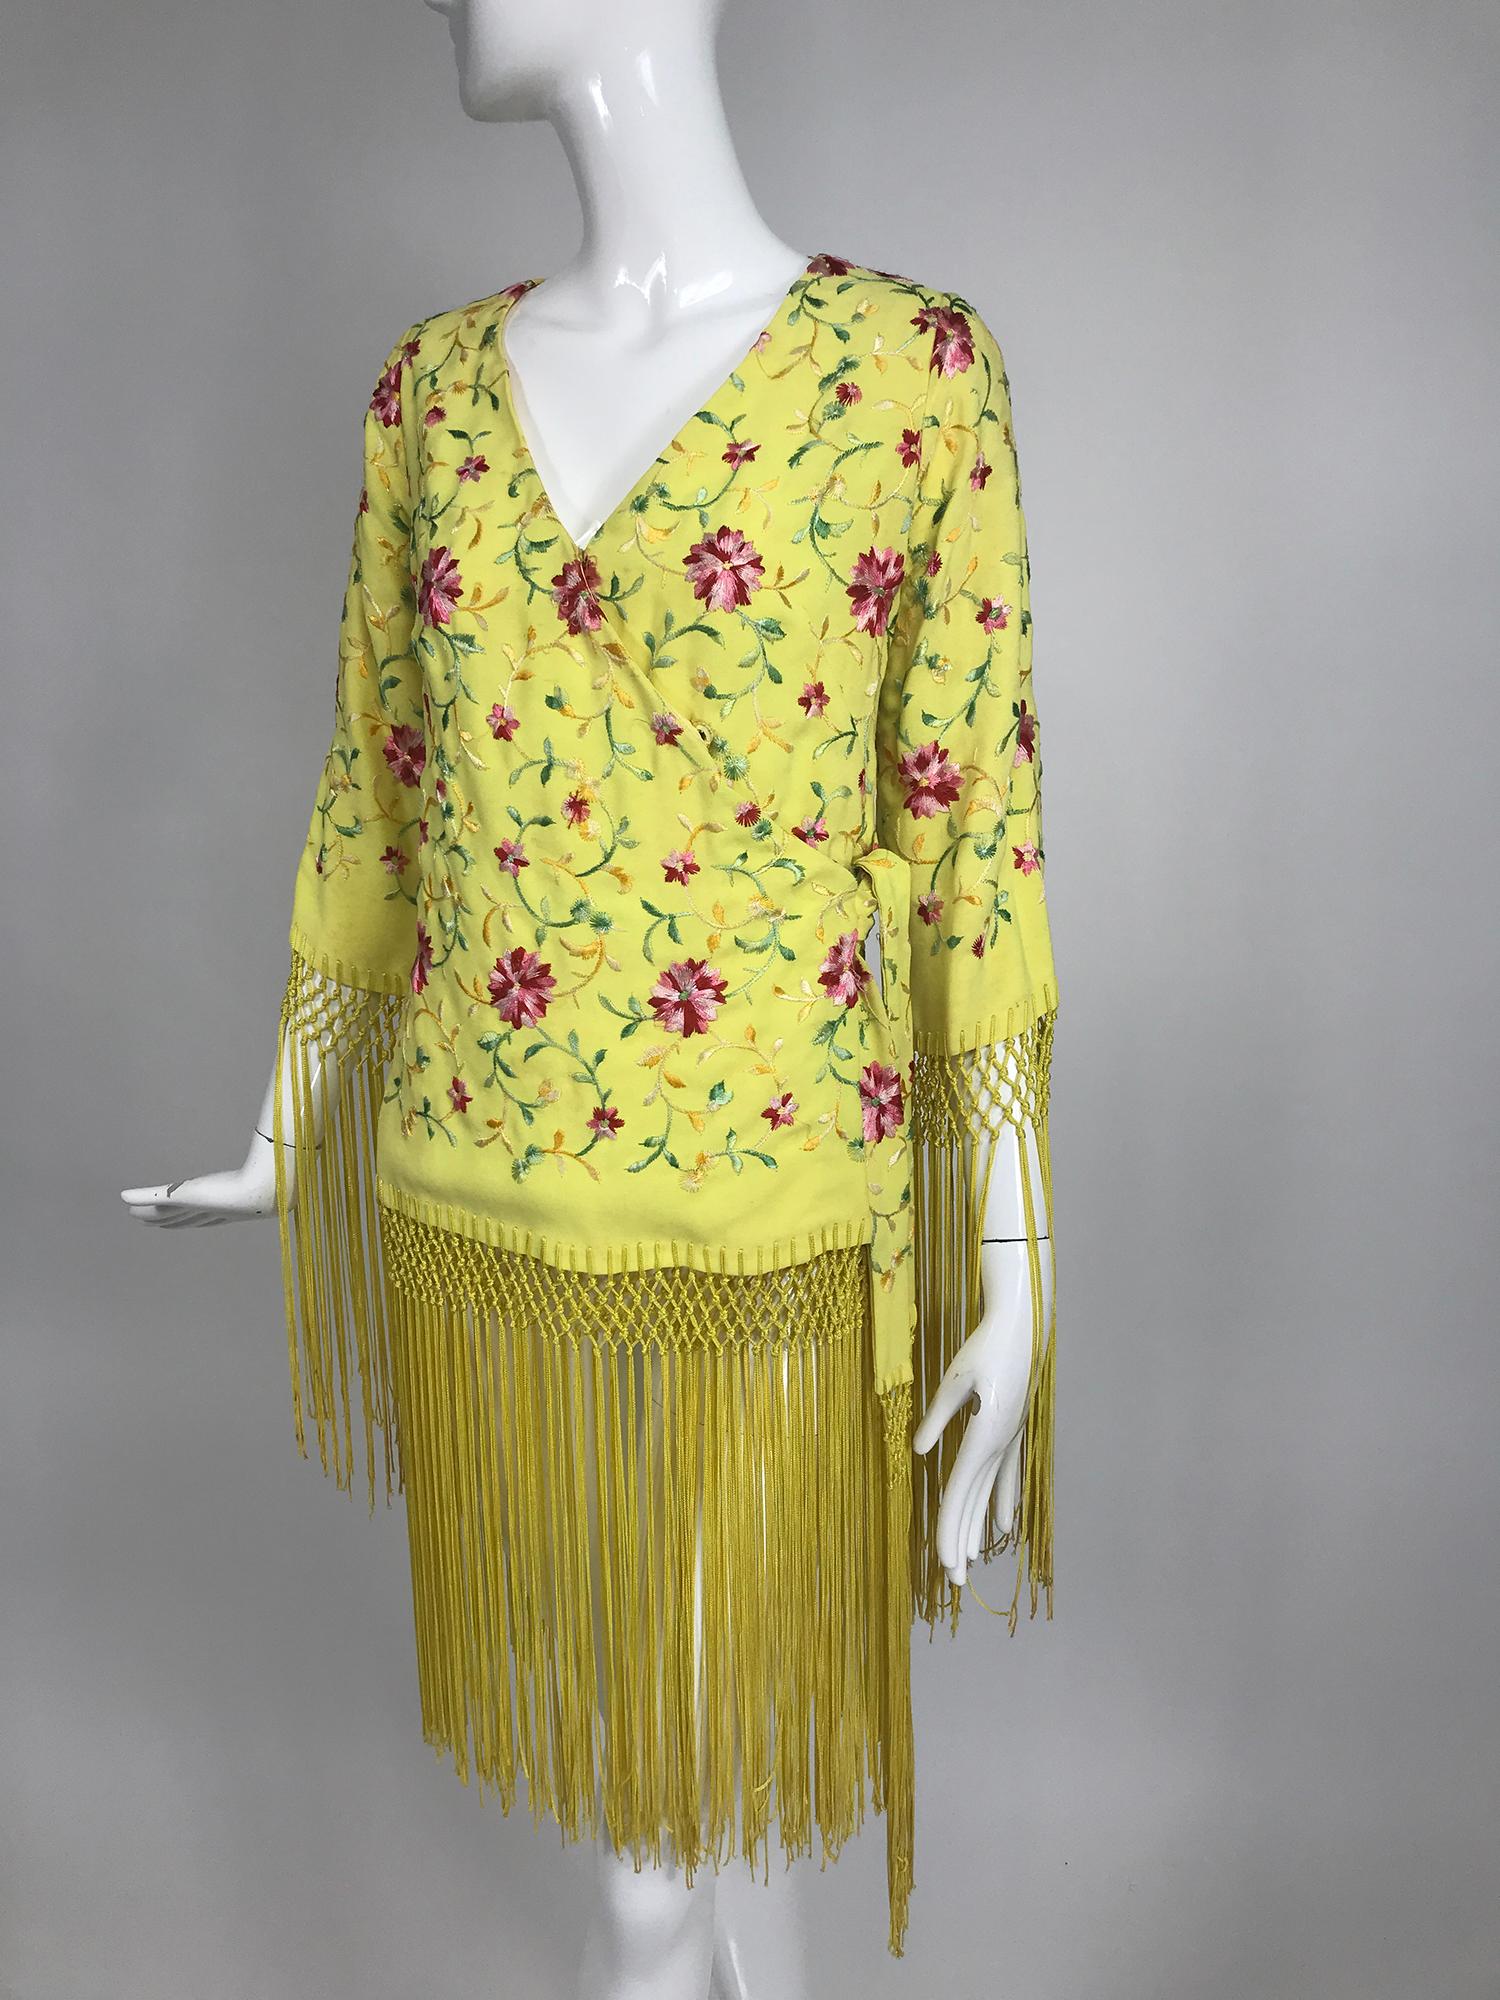 Vintage Adolfo yellow embroidered fringe trim wrap jacket tunic from the 1970s. Yellow embroidered crepe wrap jacket tunic with a V neckline, has long sleeves with macrame and long sliky fringe trim, the hem is trimmed the same. Wraps and closes at